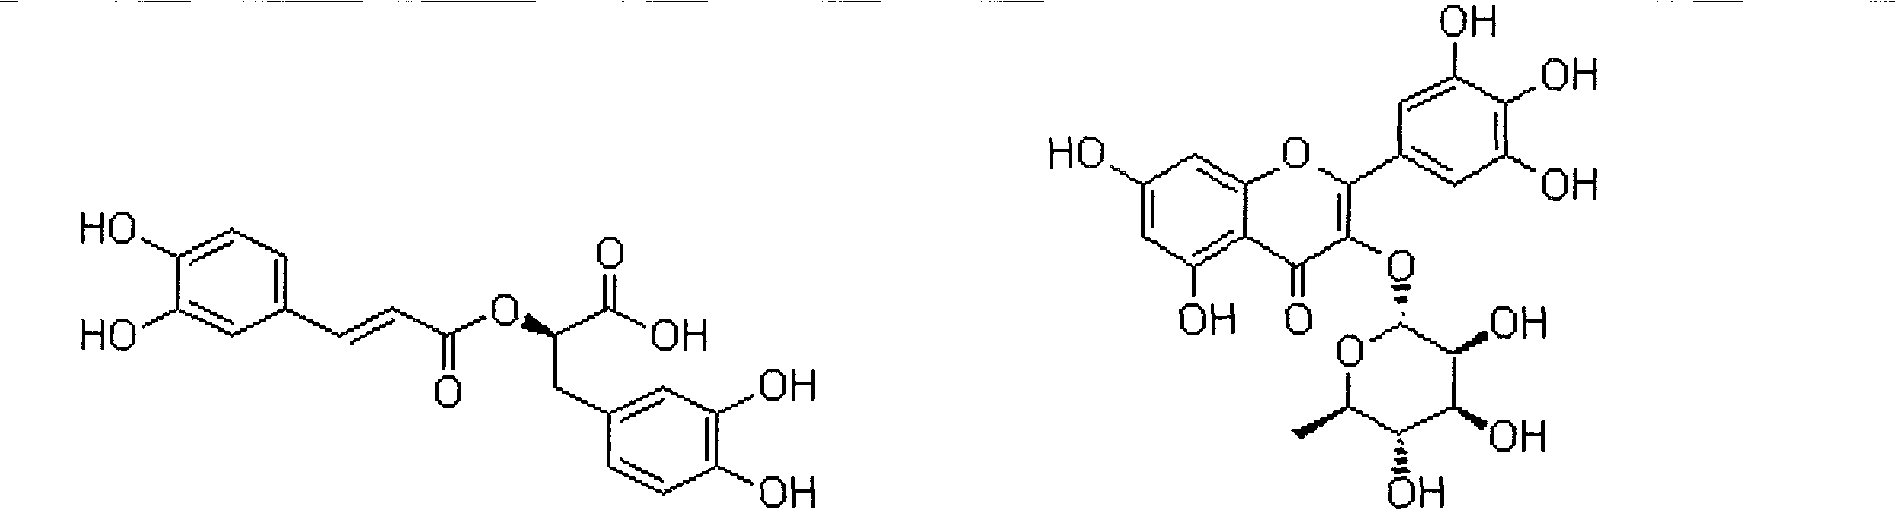 Rosmarinic acid and myricetin medicament formula and application thereof in treatment of Parkinson disease